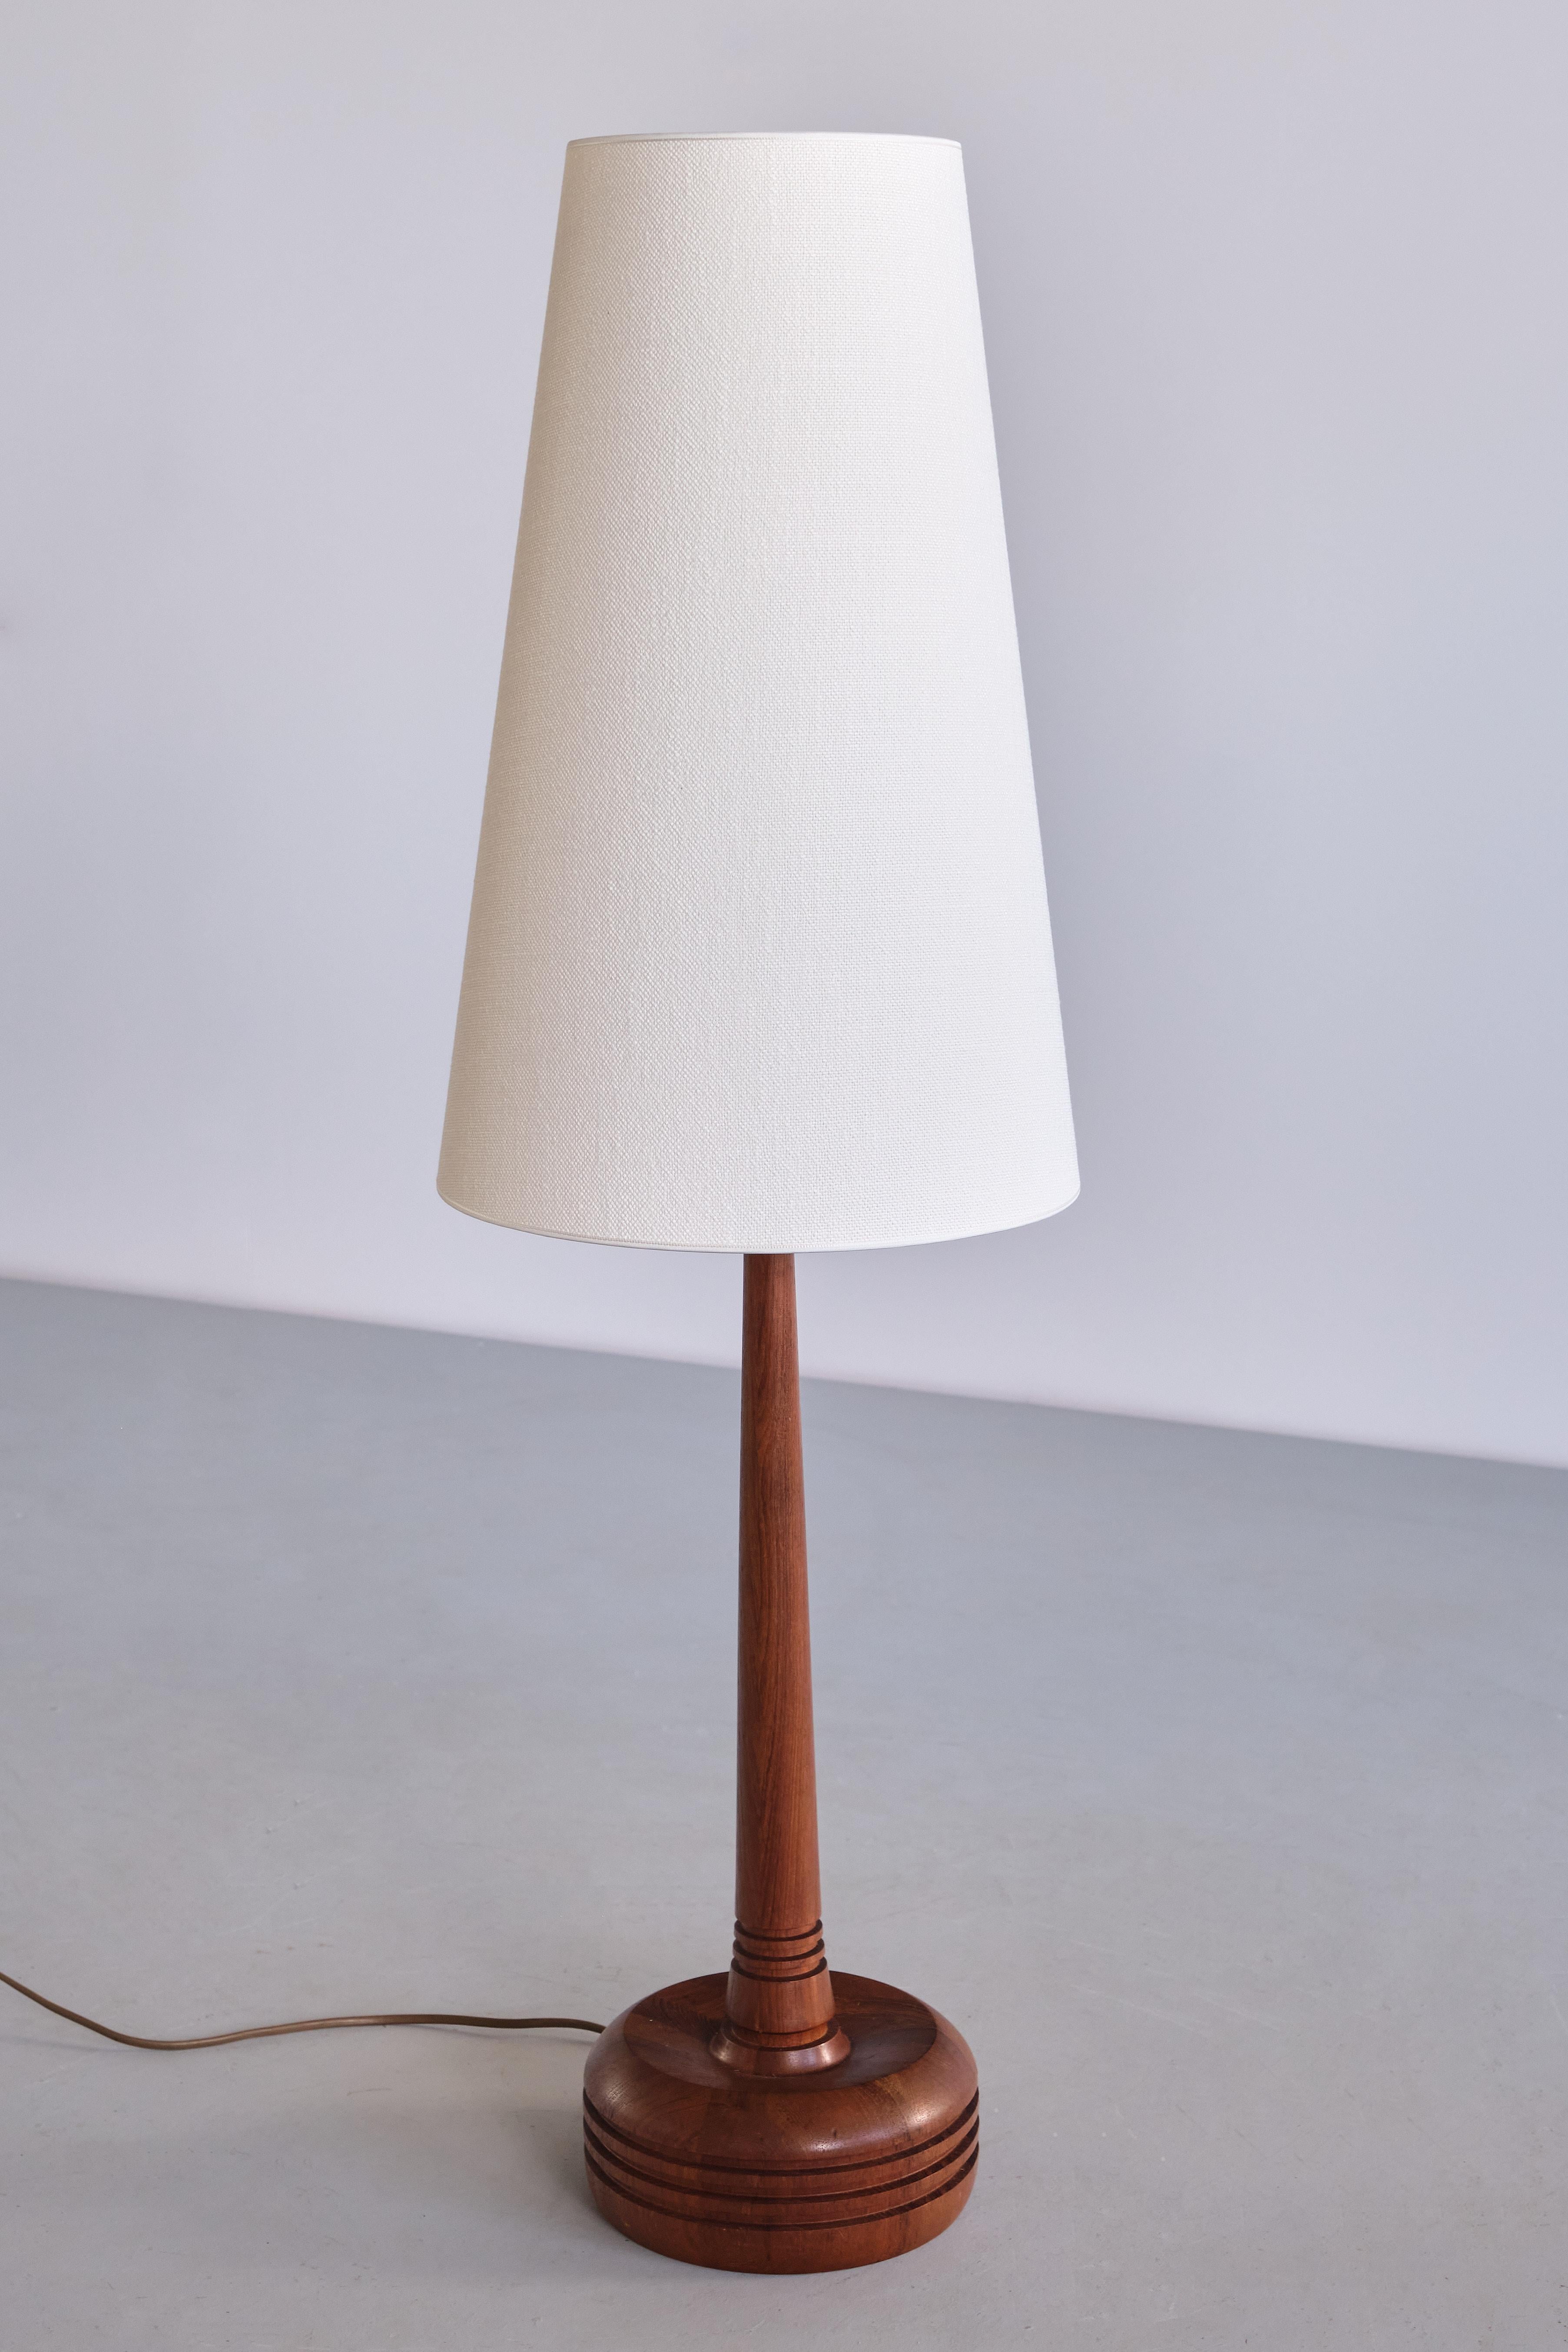 Mid-Century Modern Tall Stilarmatur Tranås Table Lamp in Teak Wood with Cone Shade, Sweden, 1960s For Sale